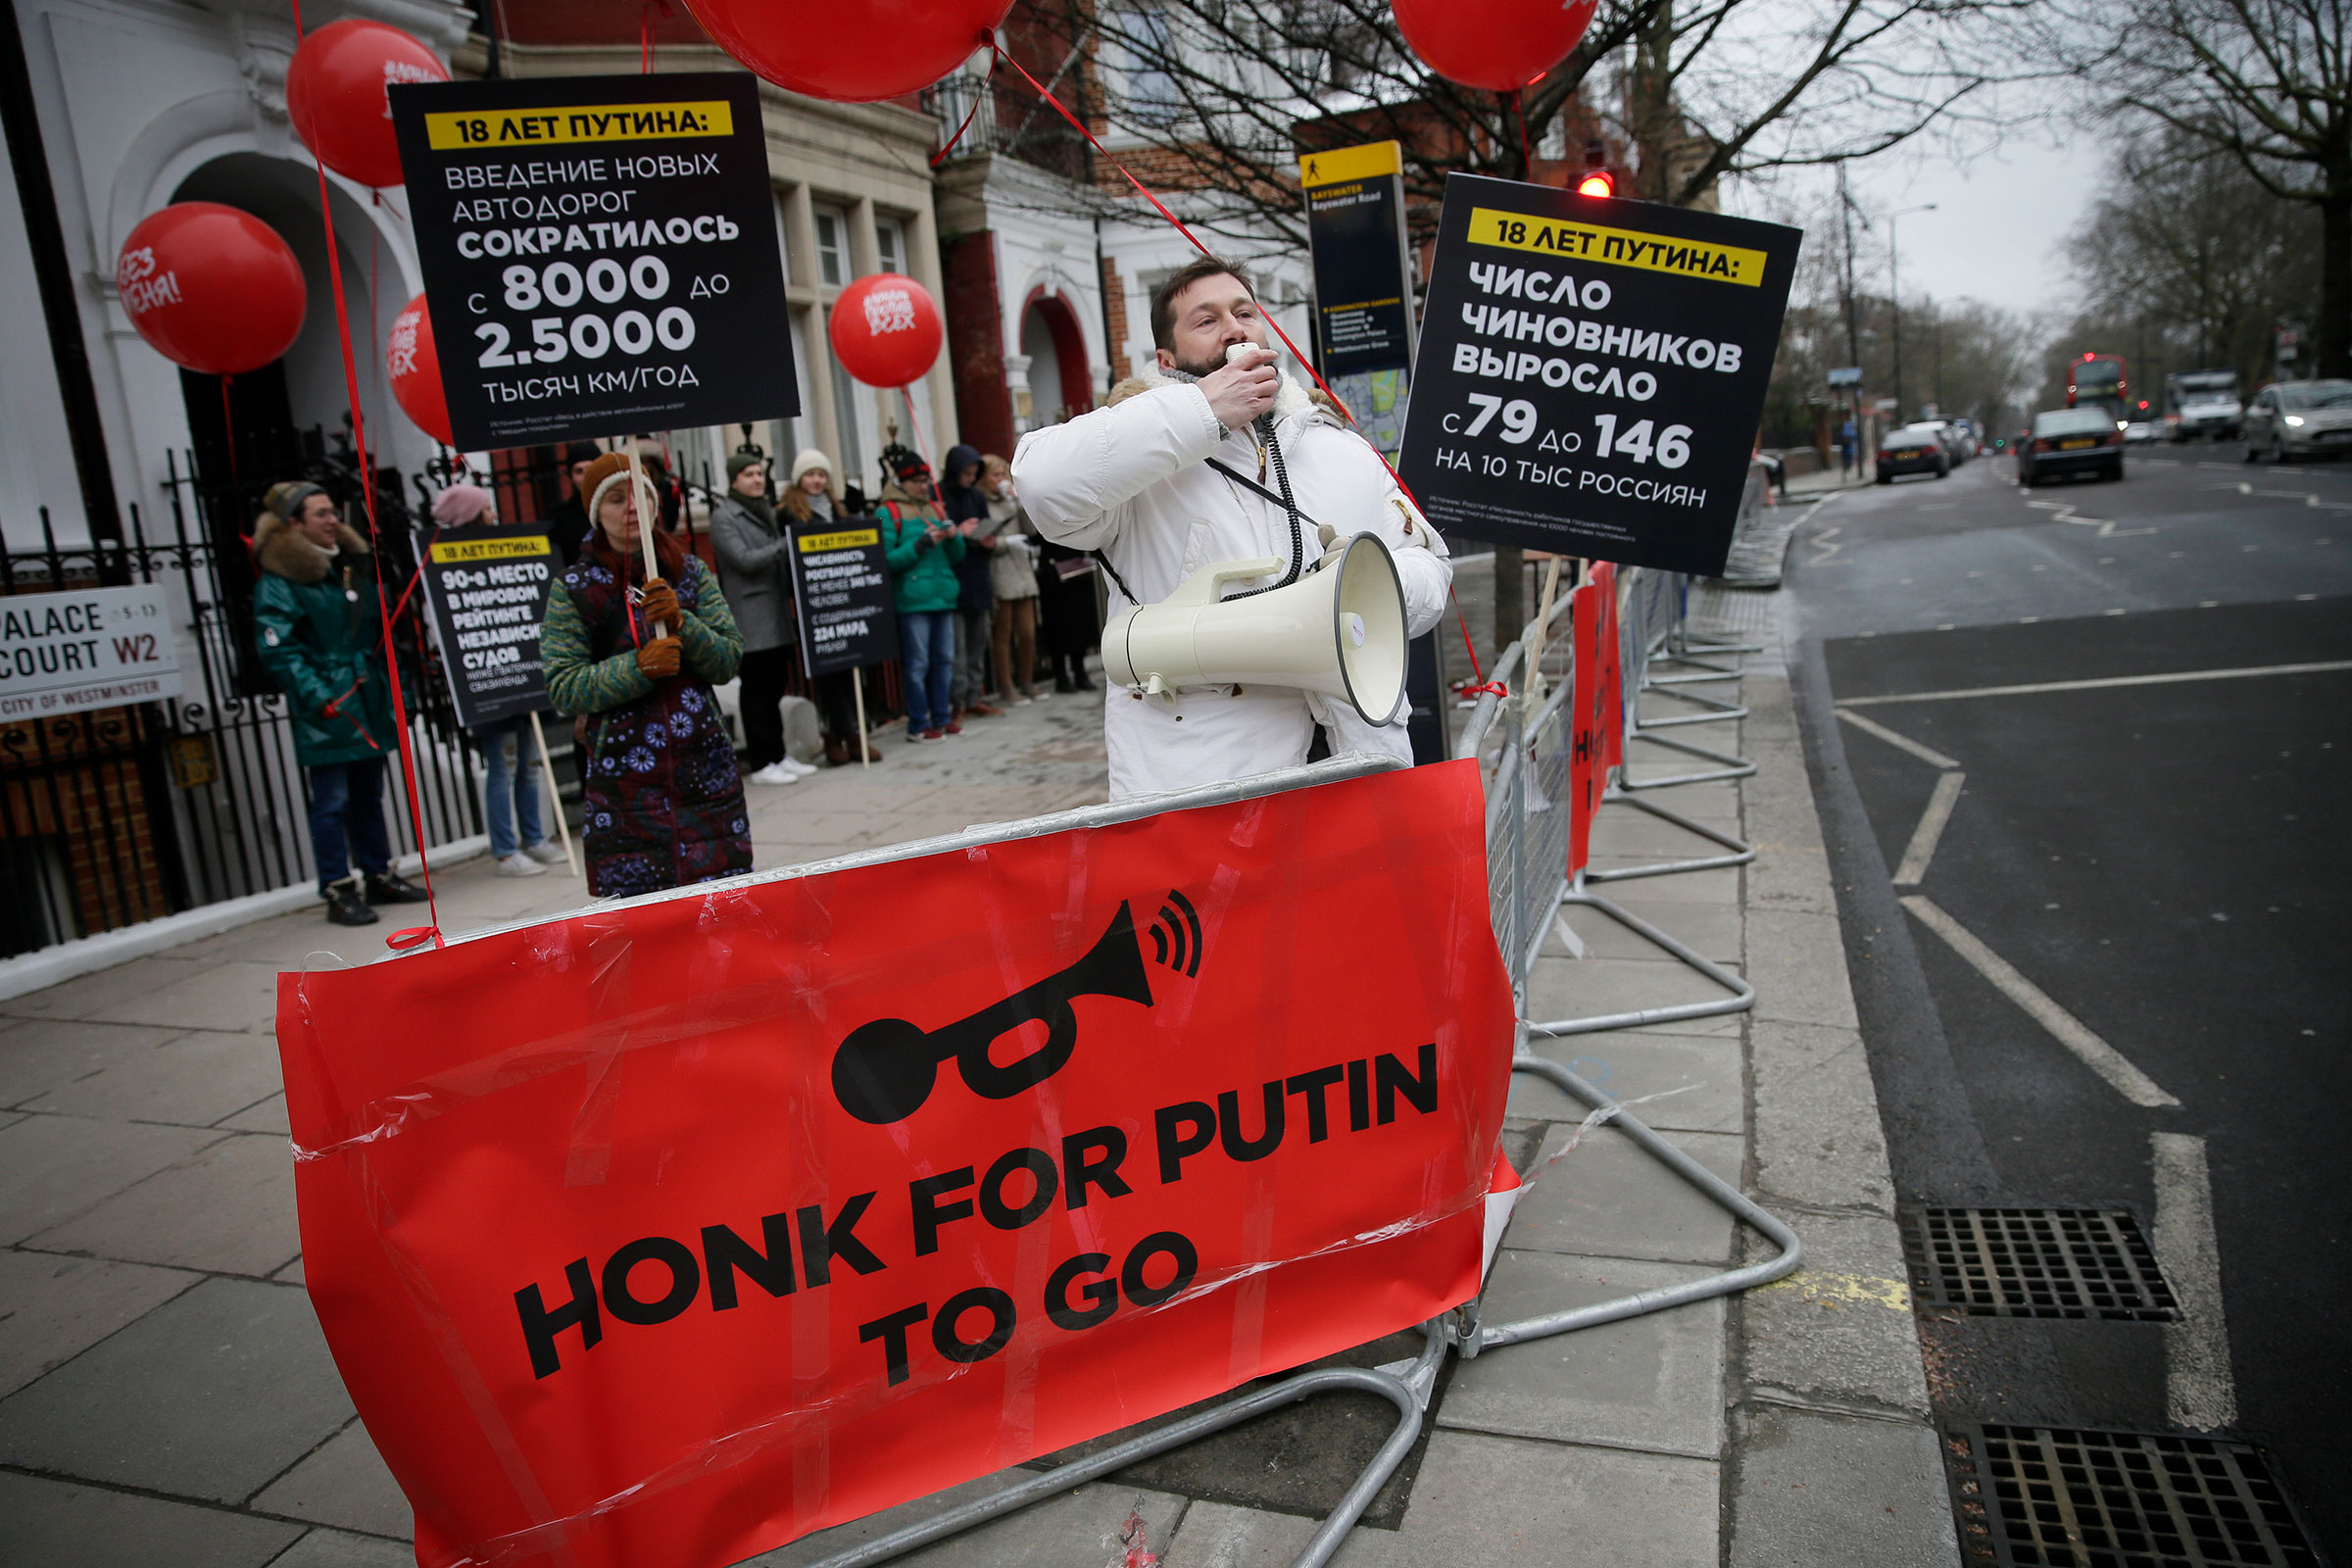 Chichvarkin speaks into a megaphone as he joins demonstrators opposing the Russian presidential election process outside the Russian Embassy in Kensington, London on March 18, 2018. (Tim Ireland—AP)